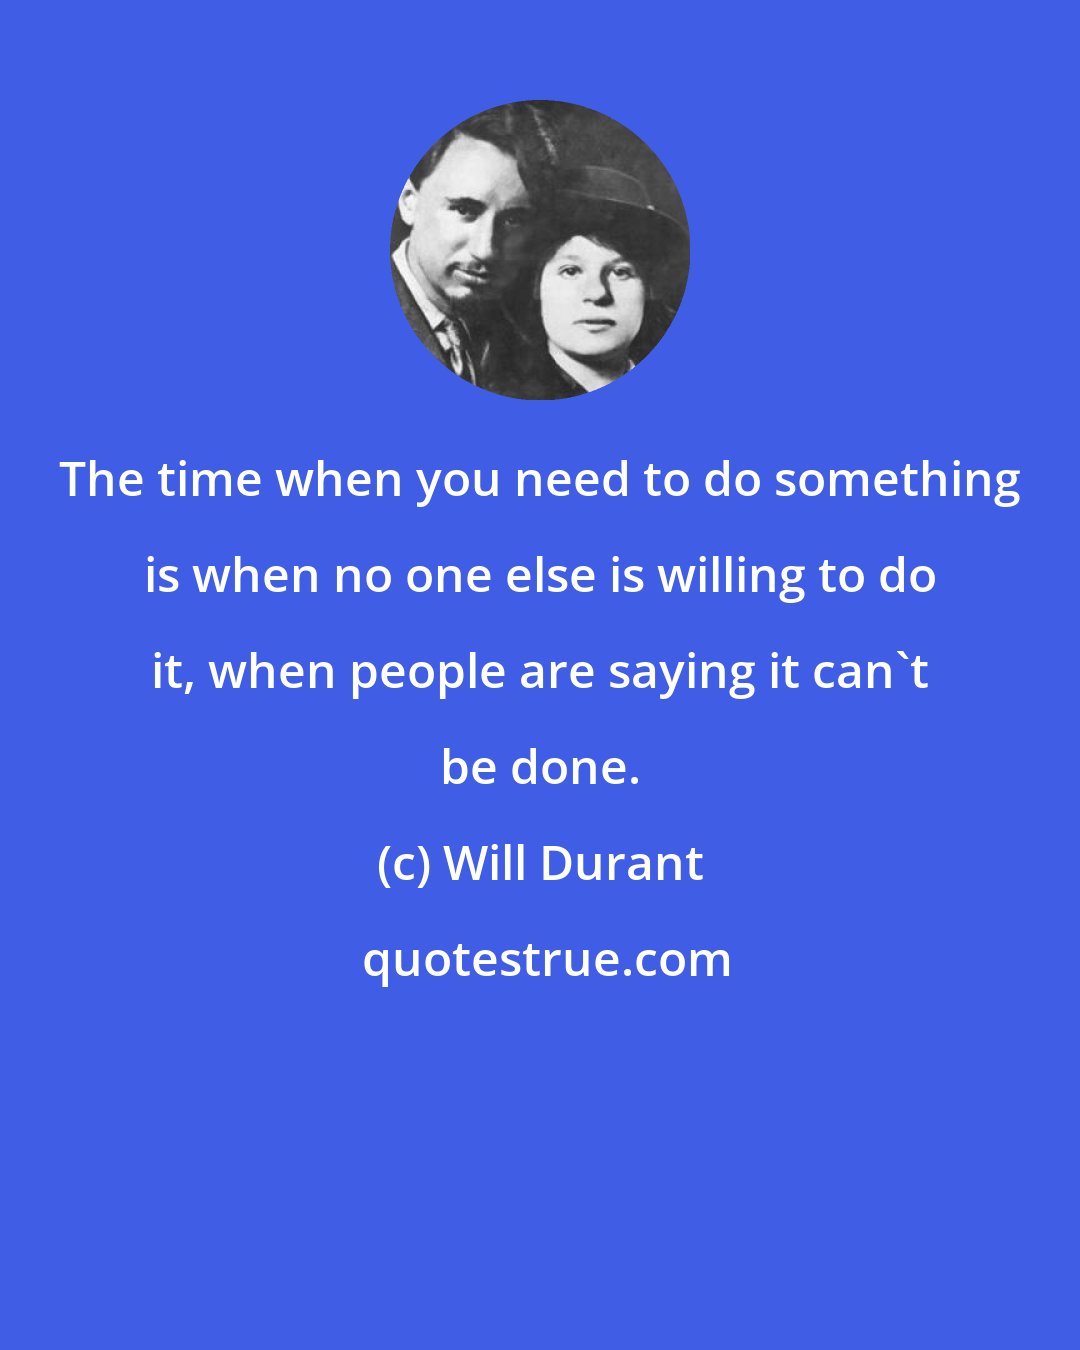 Will Durant: The time when you need to do something is when no one else is willing to do it, when people are saying it can't be done.